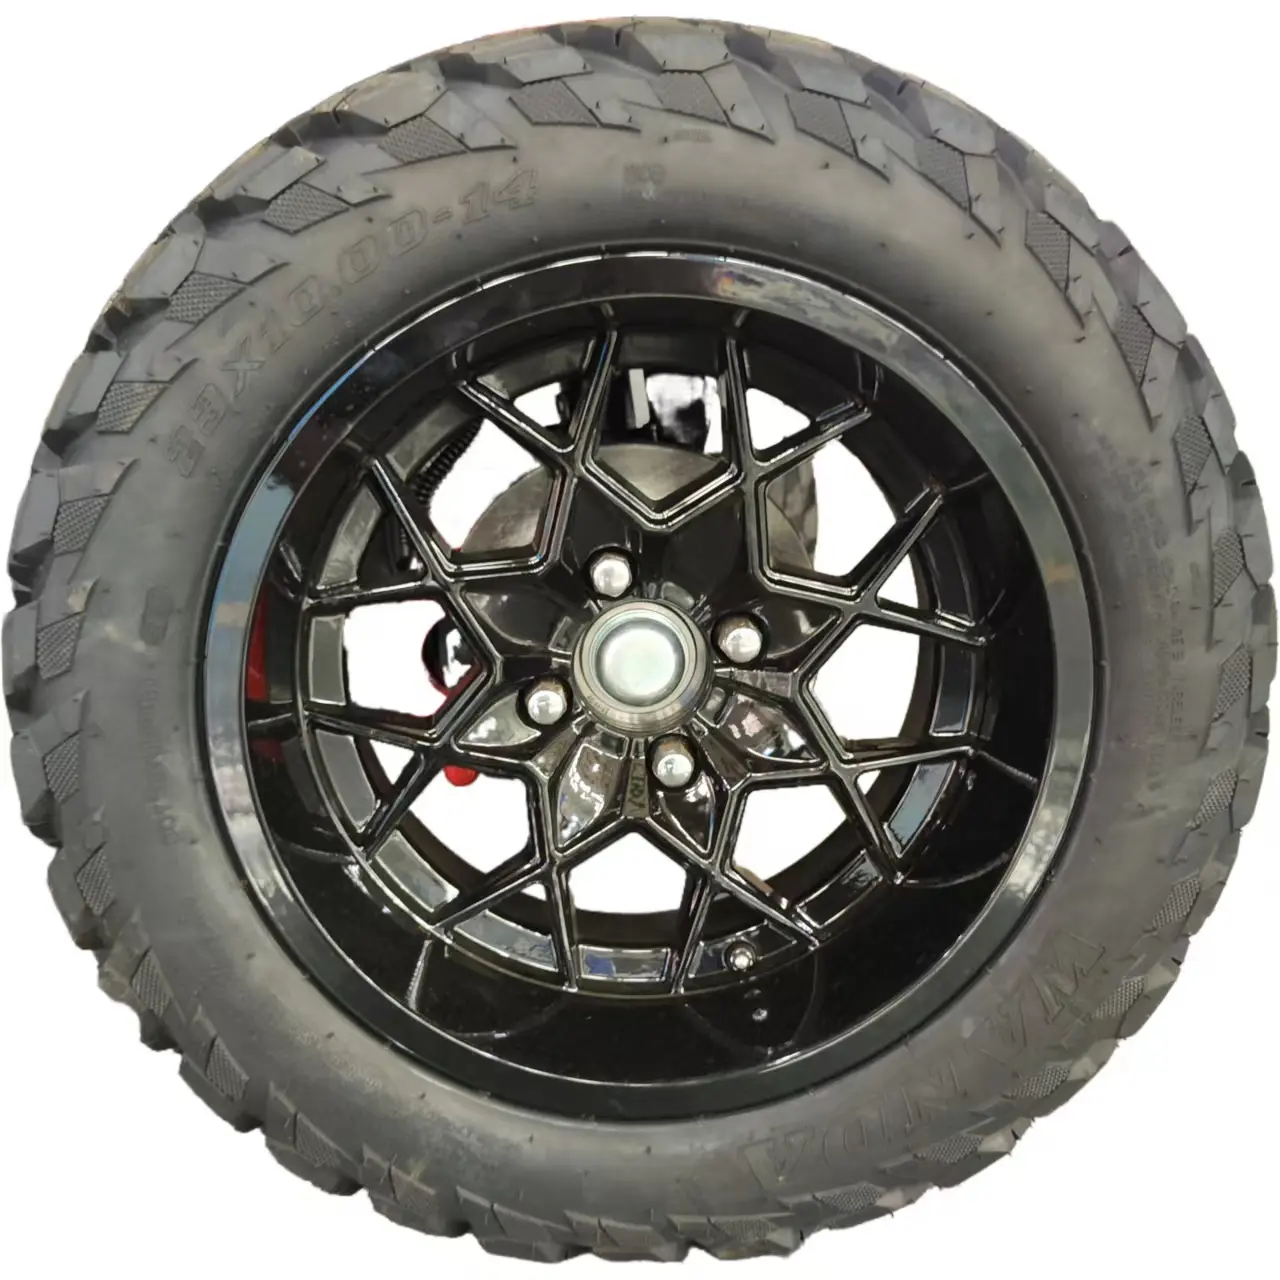 14 inch sand tire 2